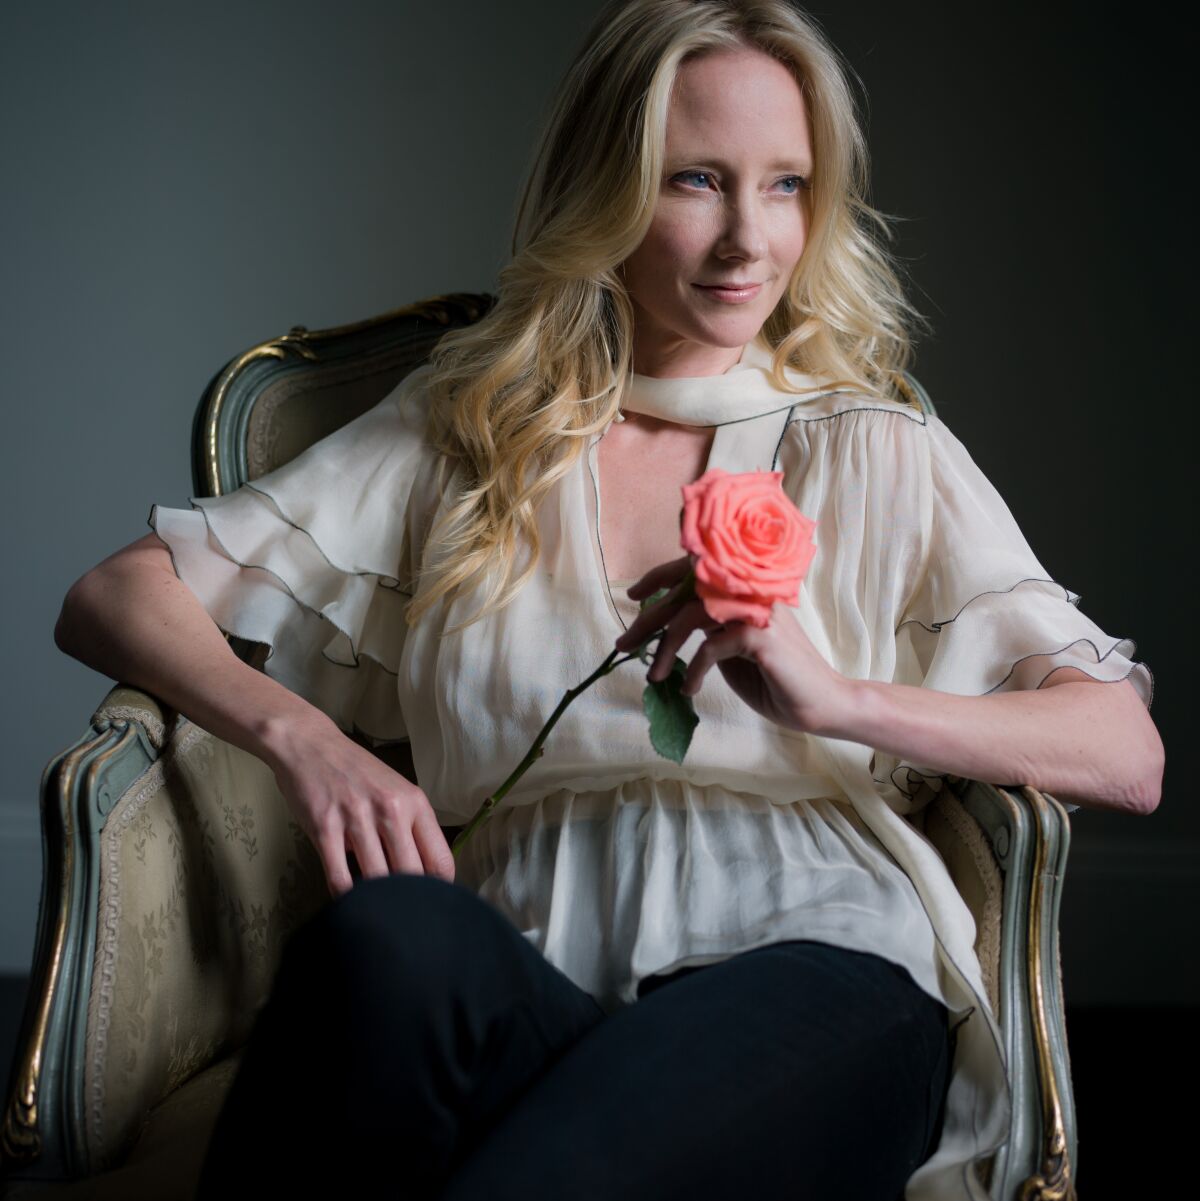 Anne Heche sits in a chair, looking left, and holding a pink rose